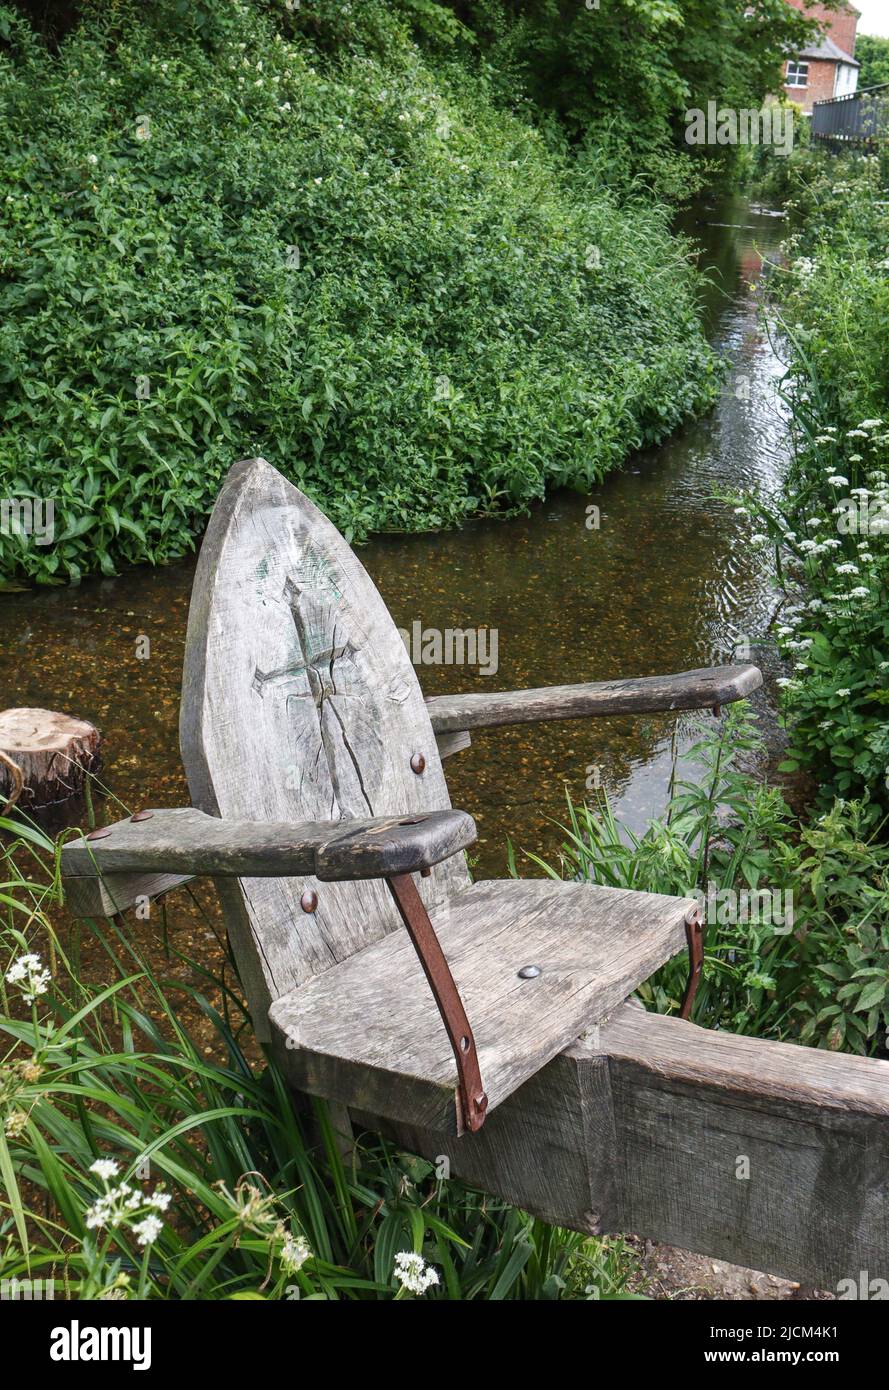 Ducking Stool on the River Avon in Christchurch, Dorset, UK. Stock Photo